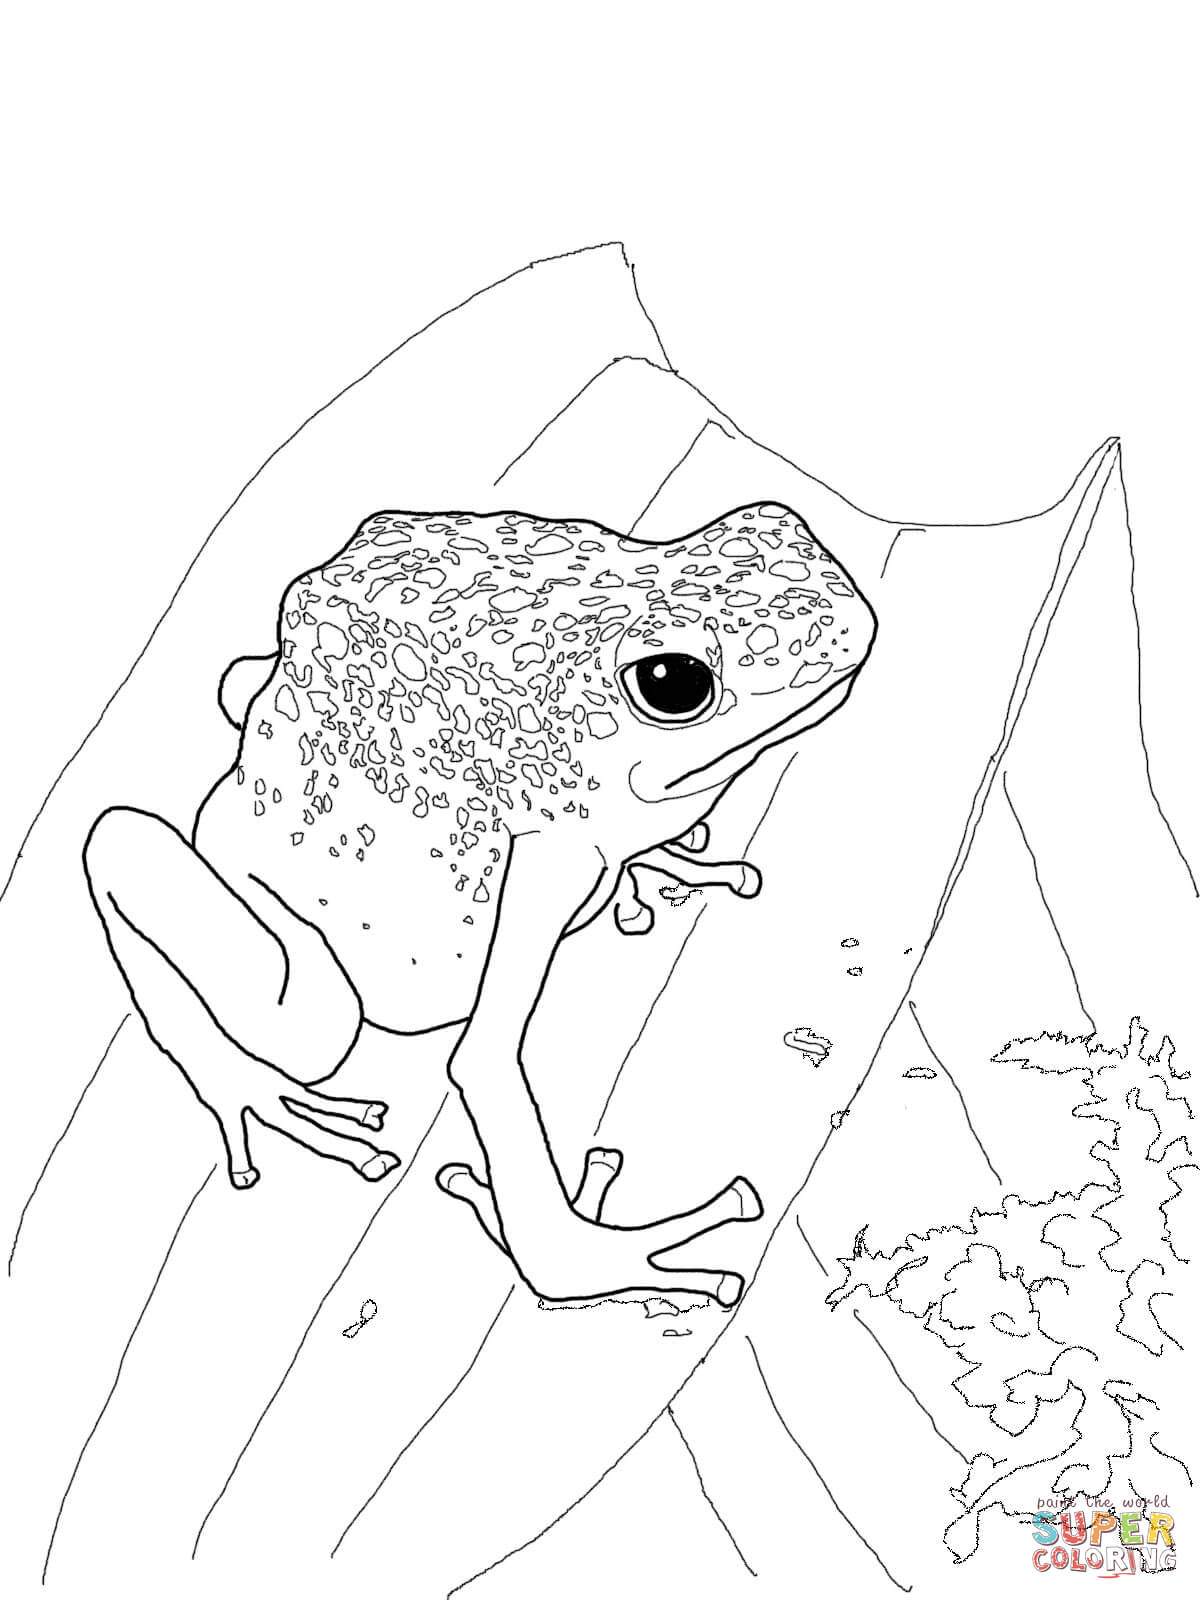 Blue Poison Dart Frog coloring #10, Download drawings